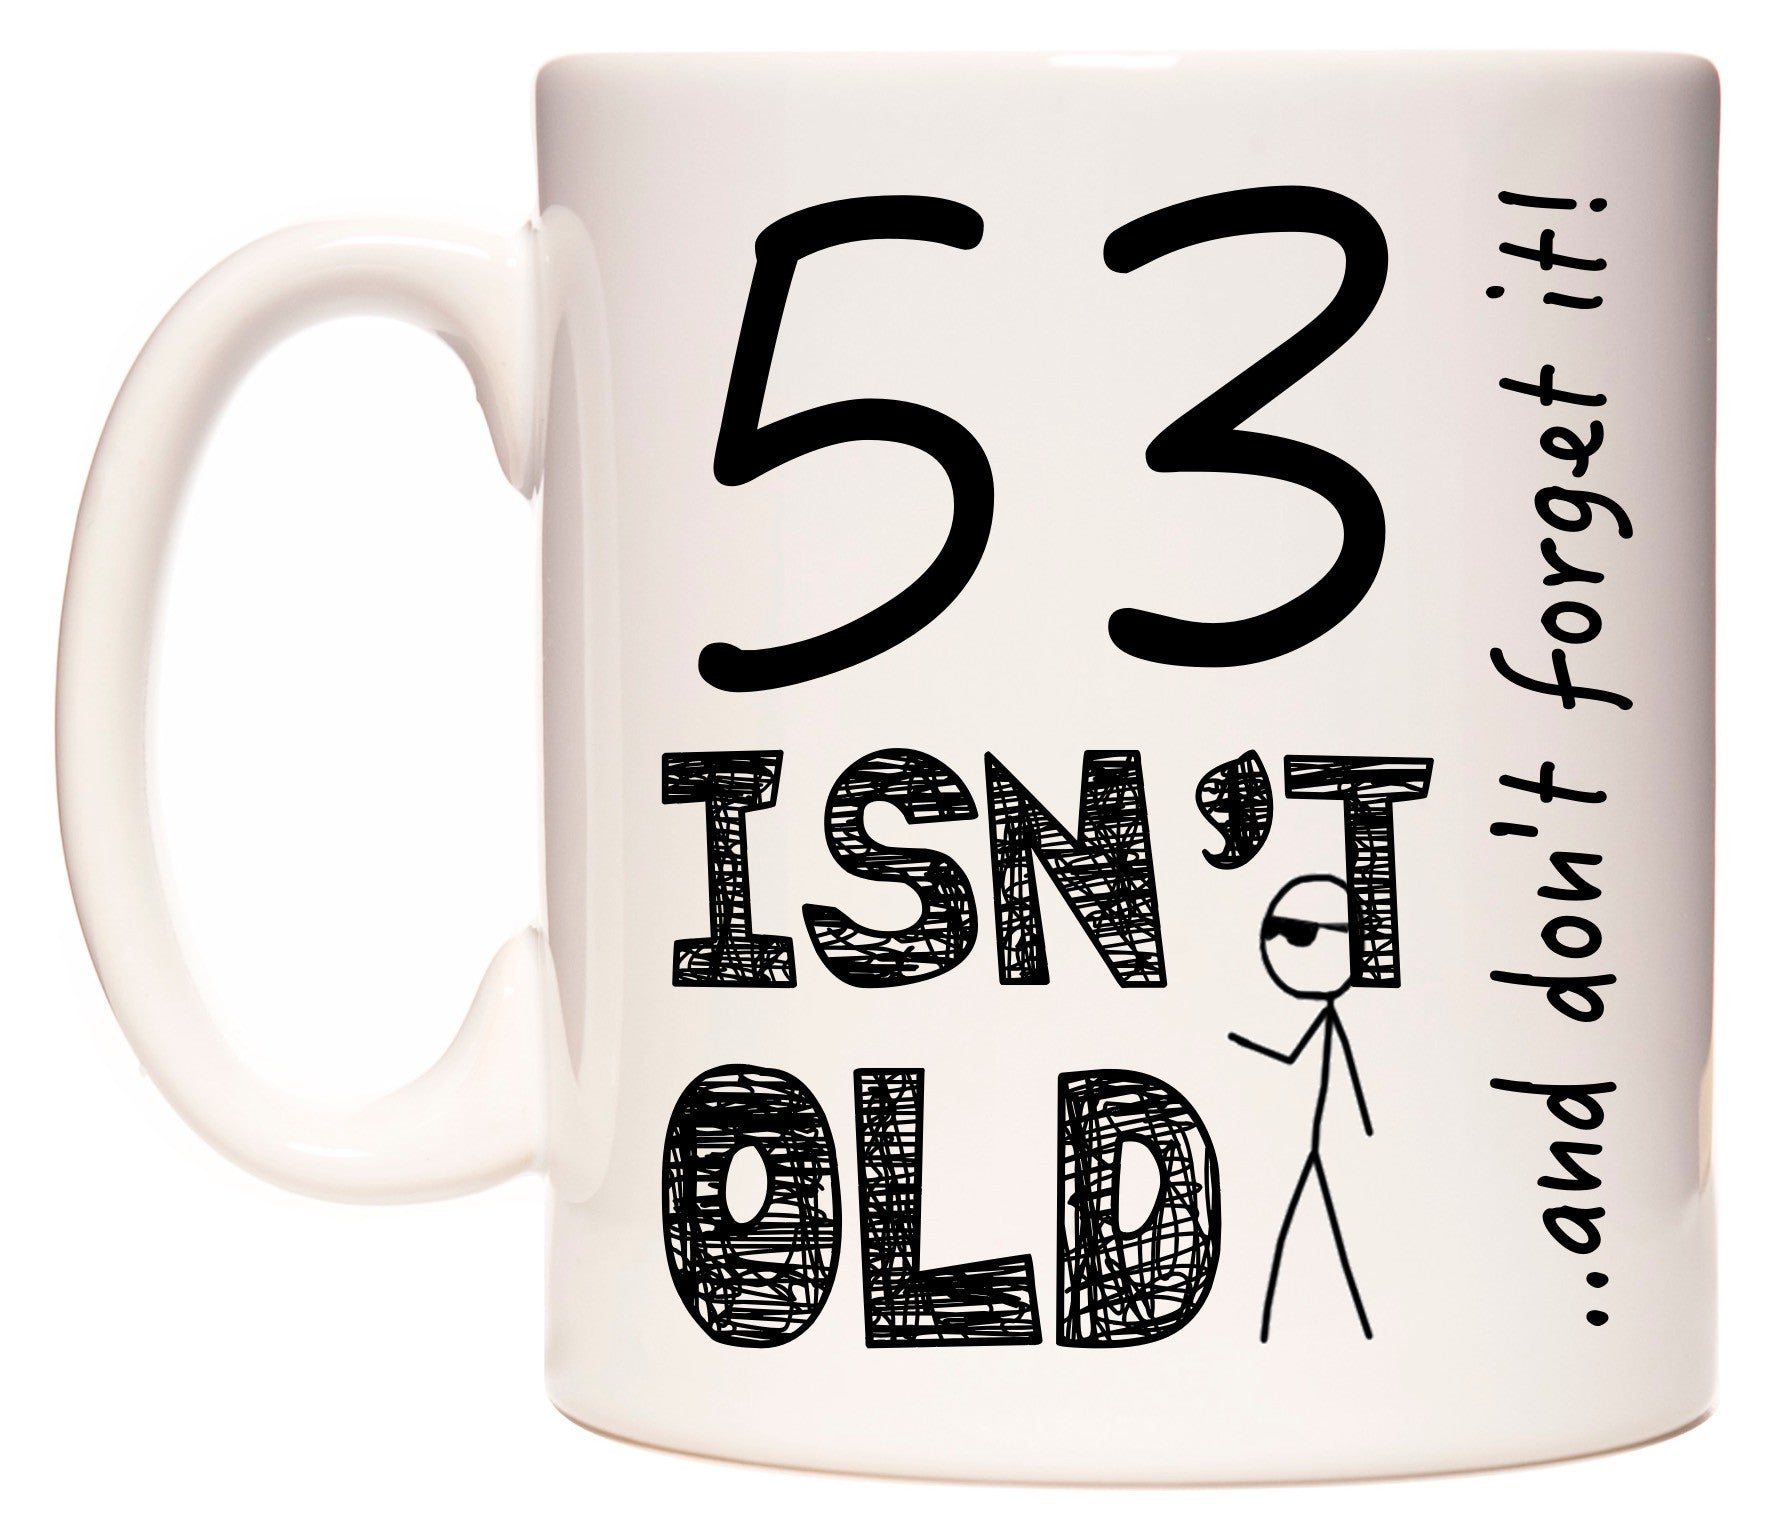 This mug features 53 Isn't Old